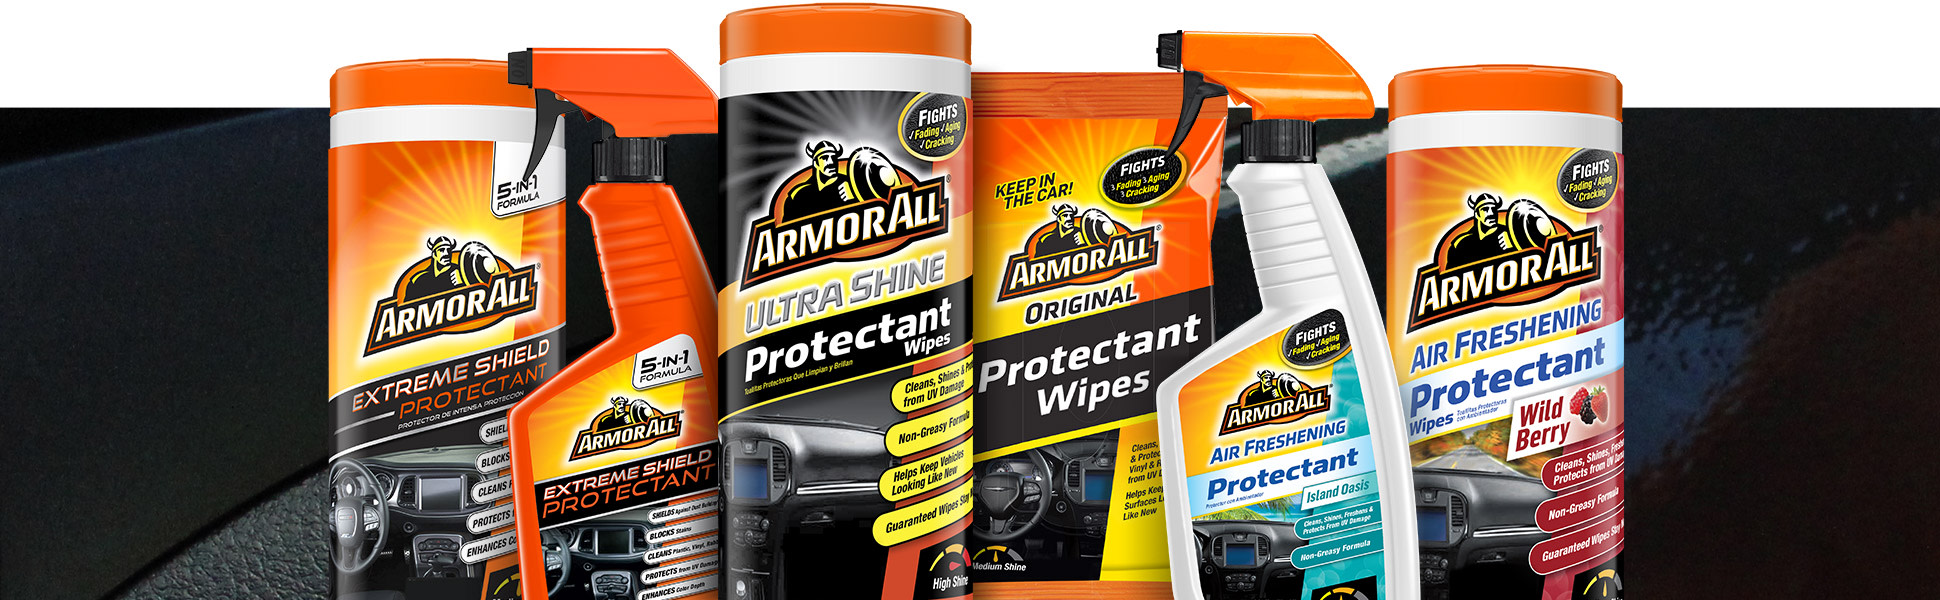 Armor All 78533 Car Protectant Wipes - 25 count